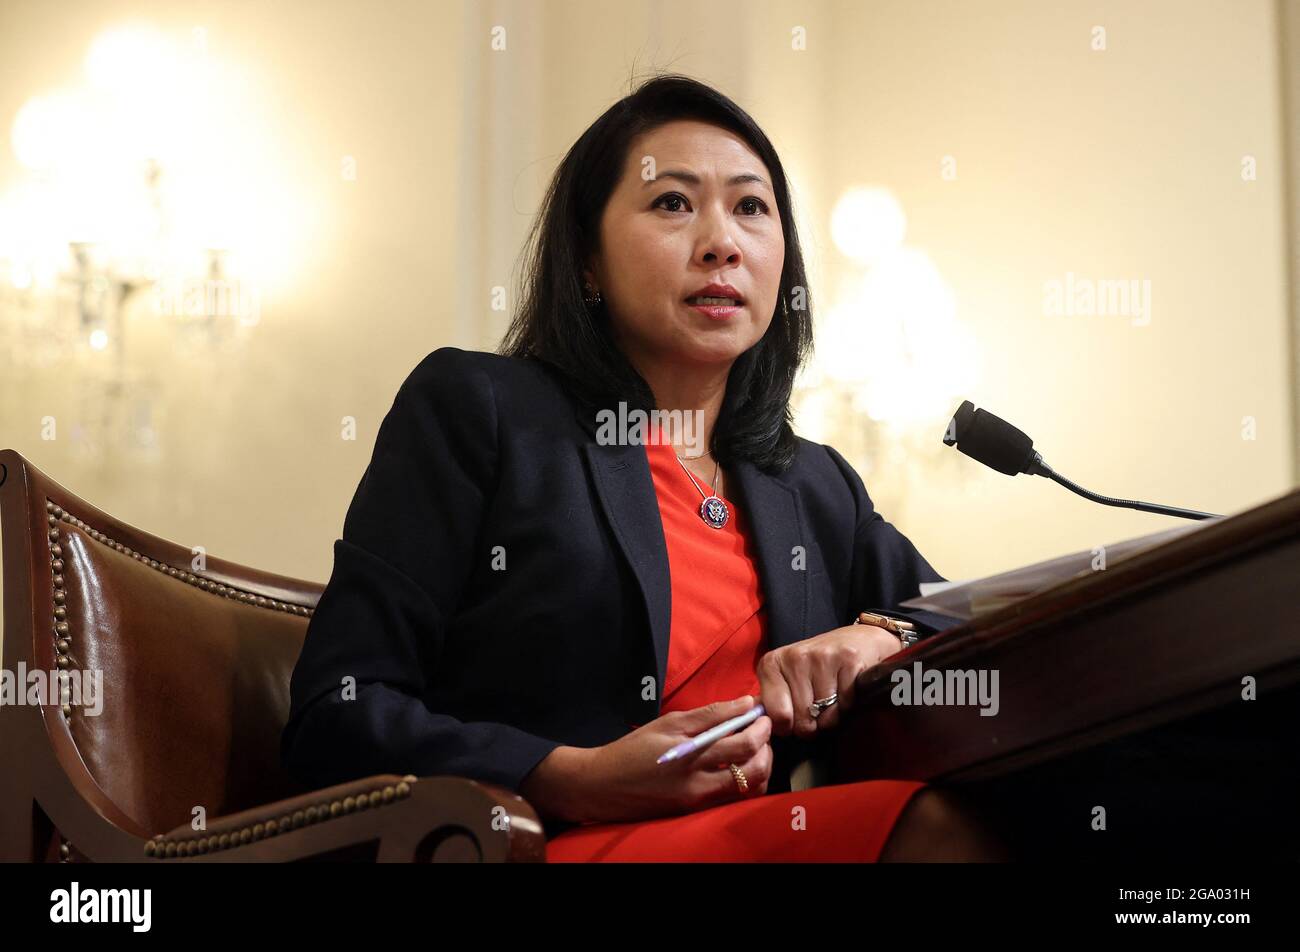 WASHINGTON, DC - JULY 27: U.S. Rep. Stephanie Murphy (D-FL) speaks during a hearing by the House Select Committee investigating the January 6 attack on the U.S. Capitol on July 27, 2021 at the Cannon House Office Building in Washington, DC. Members of law enforcement testified about the attack by supporters of former President Donald Trump on the U.S. Capitol. According to authorities, about 140 police officers were injured when they were trampled, had objects thrown at them, and sprayed with chemical irritants during the insurrection. (Photo by Chip Somodevilla/Getty Images) Photo by Brendan Stock Photo